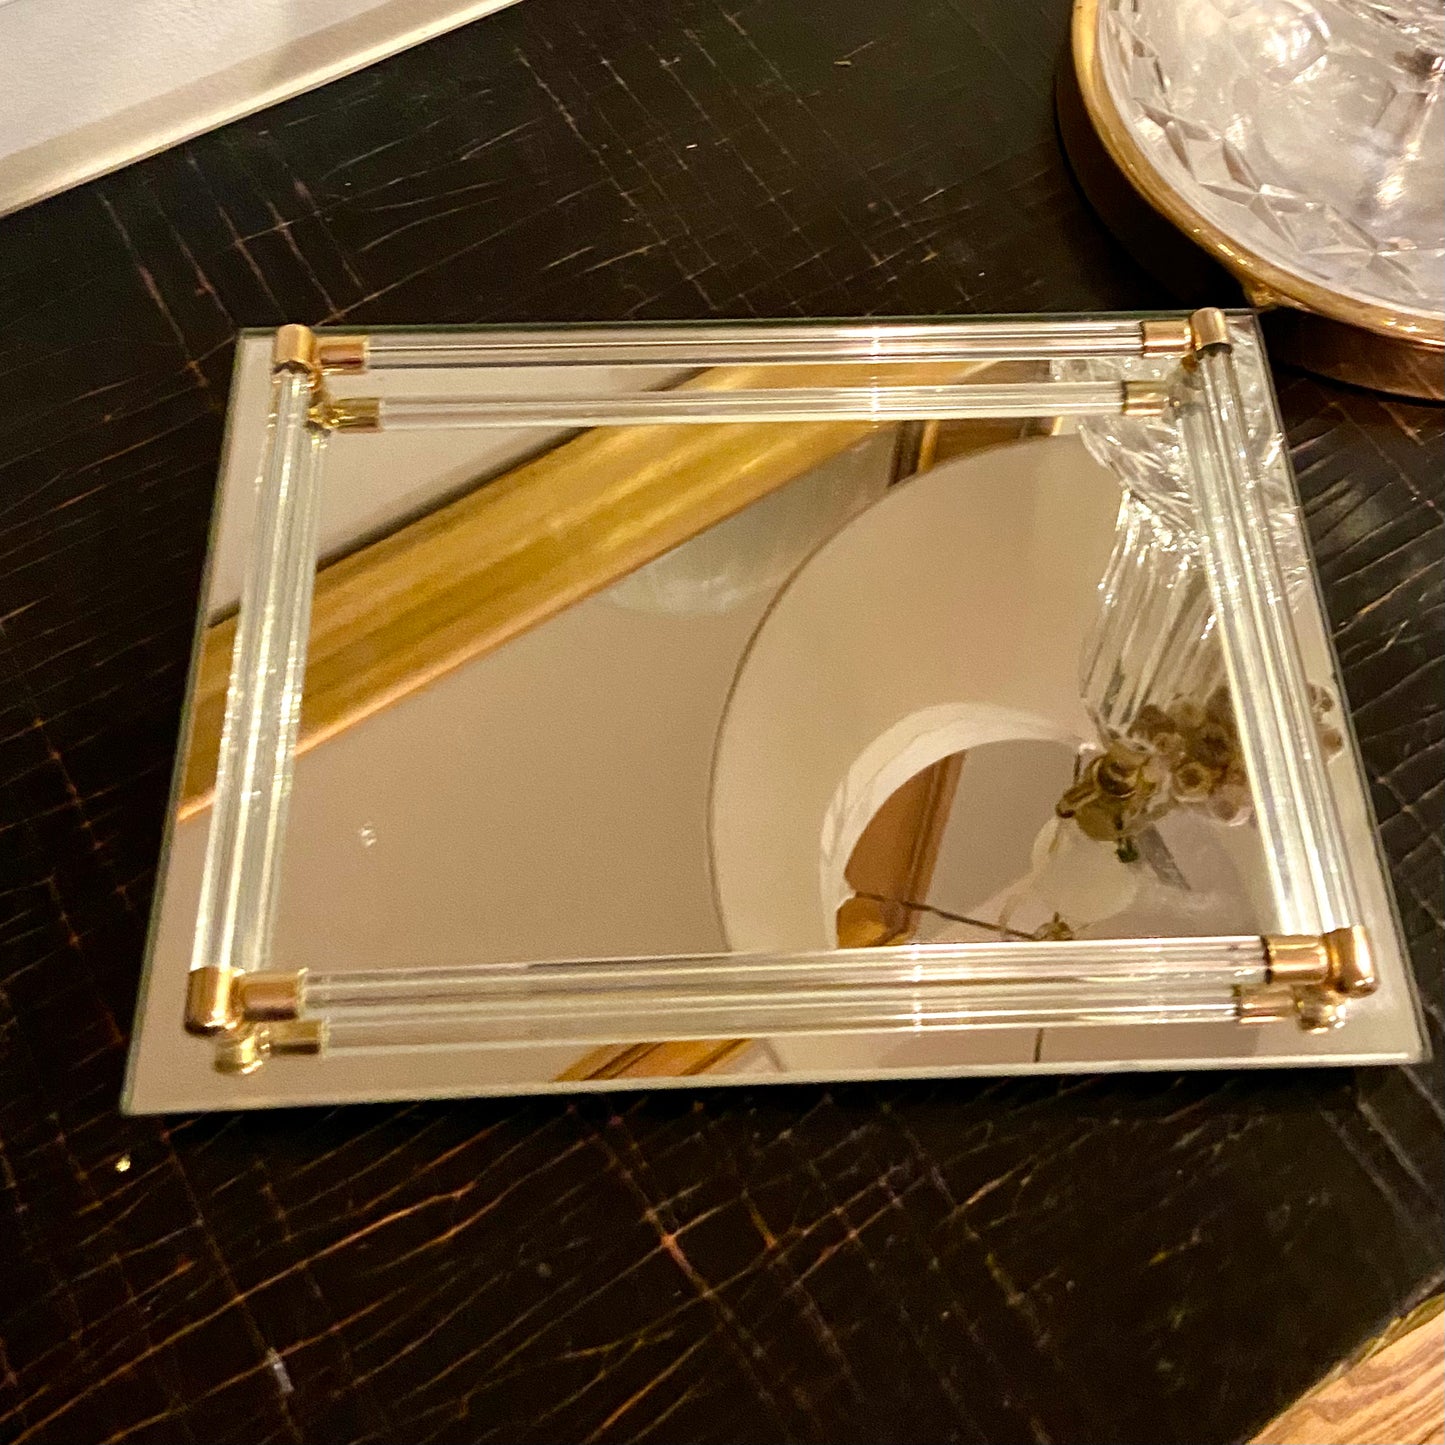 Vintage mirrored vanity or bar tray with brass and glass rails.